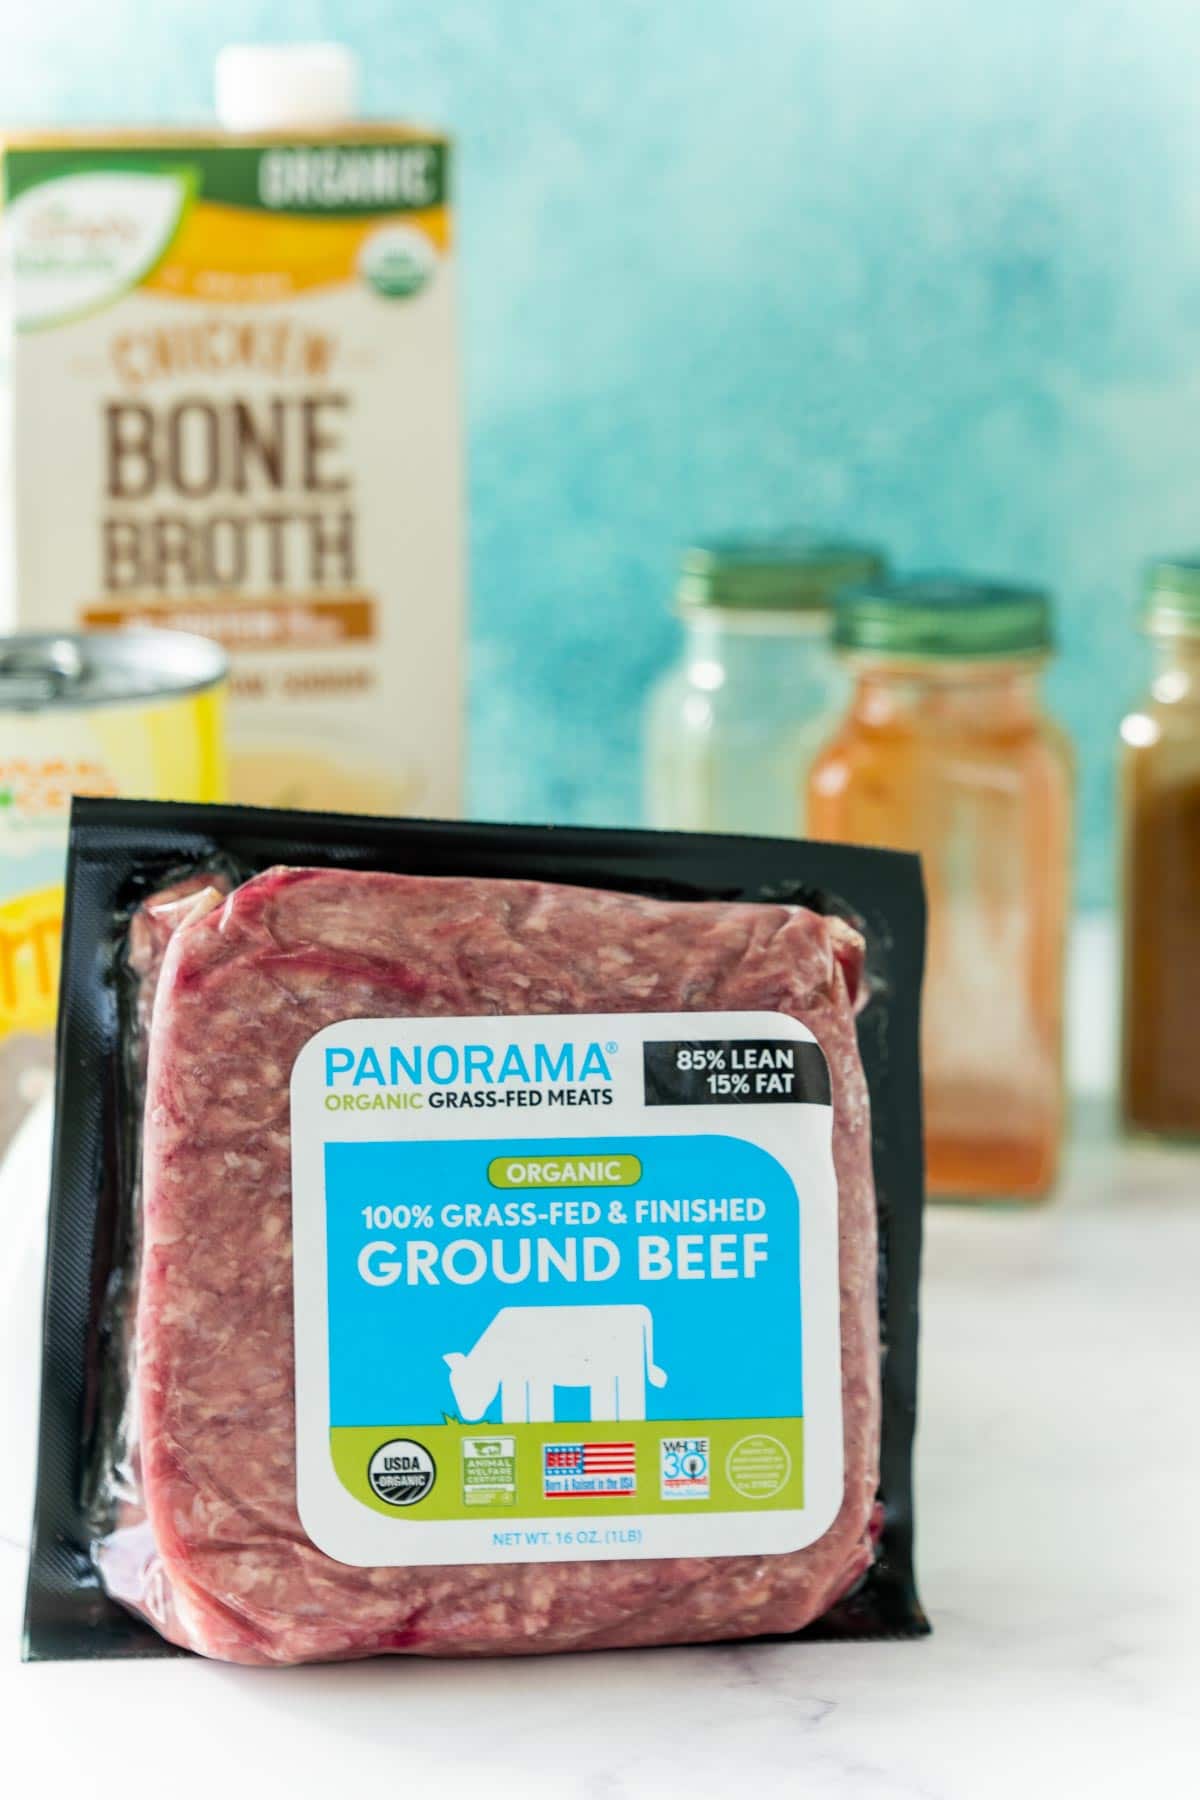 Panorama ground beef with spices in the background